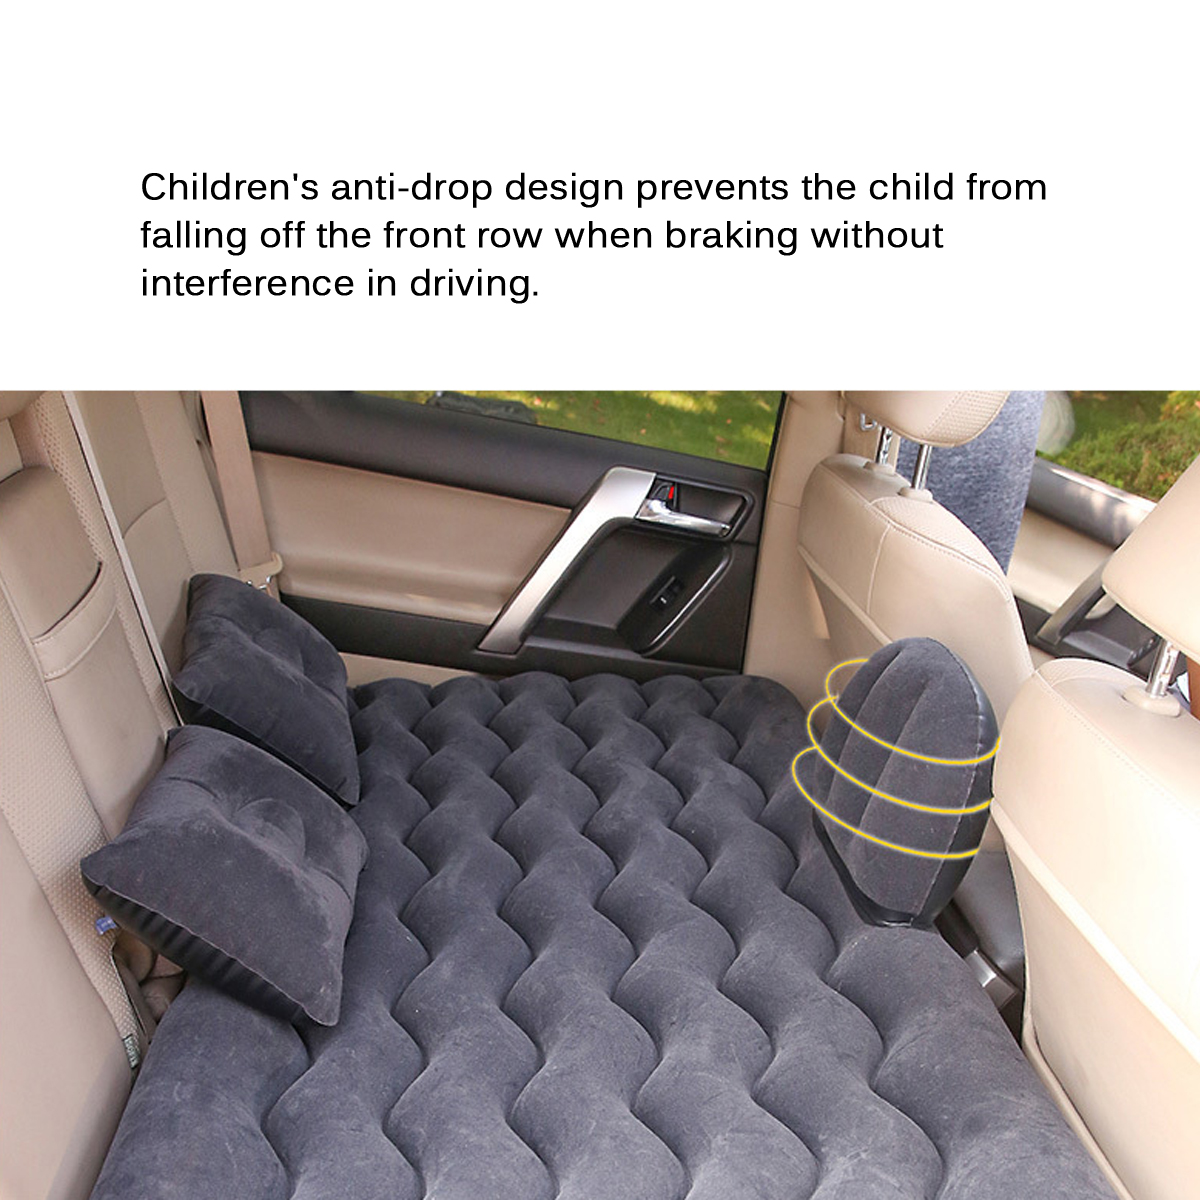 Car-Inflatable-Mat-Outdoor-Traveling-Air-Mattresses-Camping-Folding-Sleeping-Bed-with-Pillows-and-Pu-1612981-3